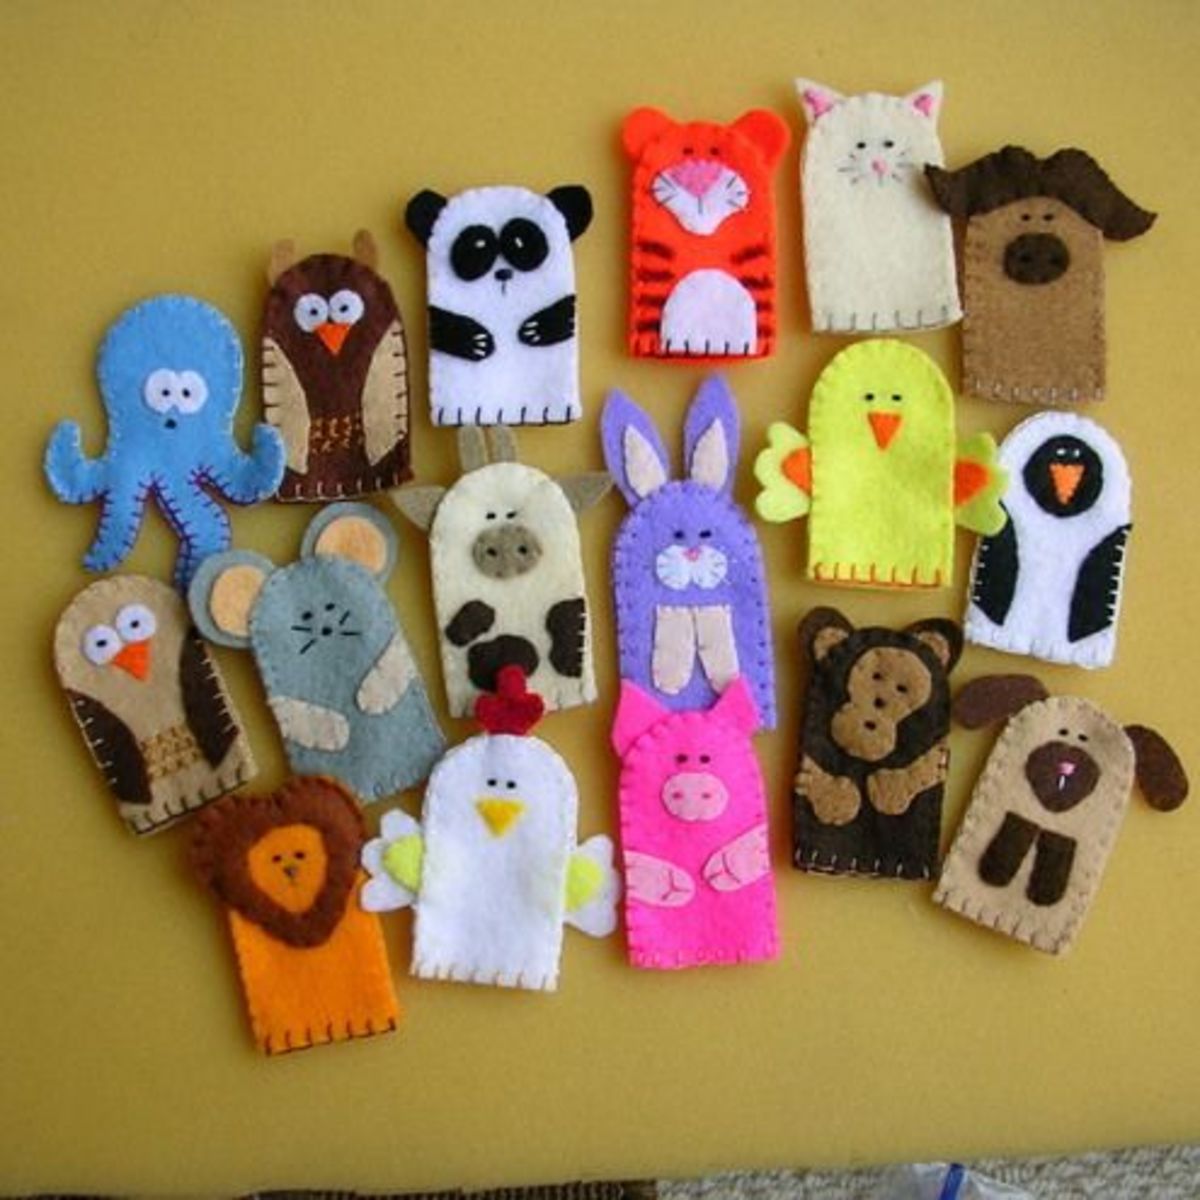 Looking Cute Toys Start With Soft Plush Animal Finger Puppets